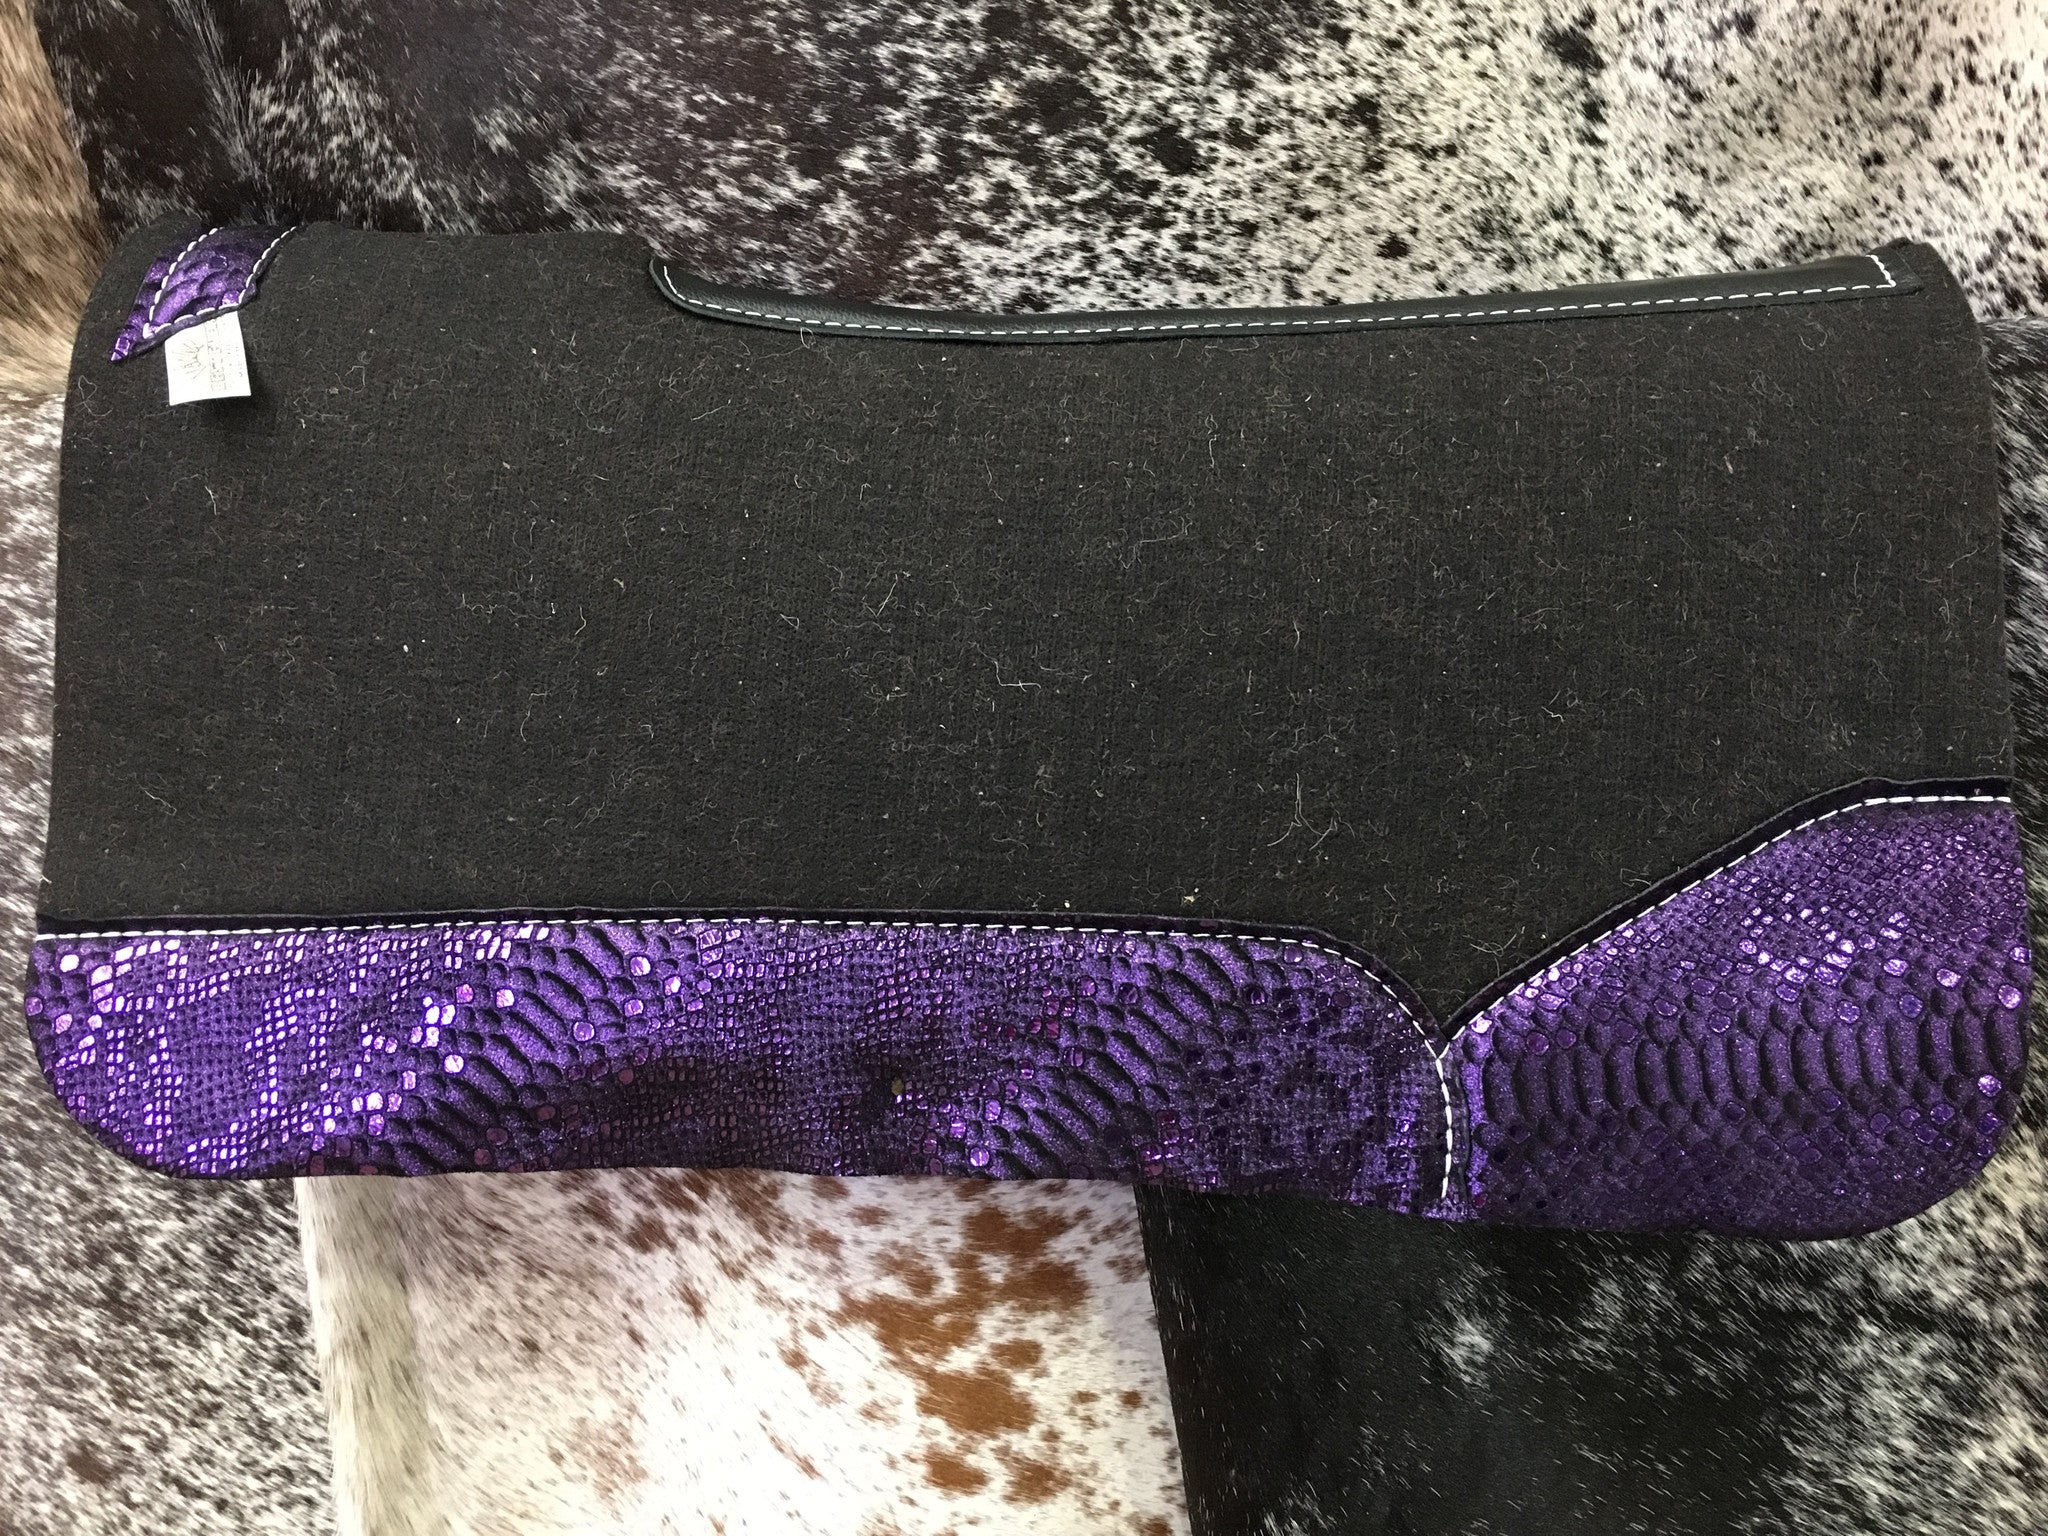 Best ever saddle pad with purple mystic wear leathers